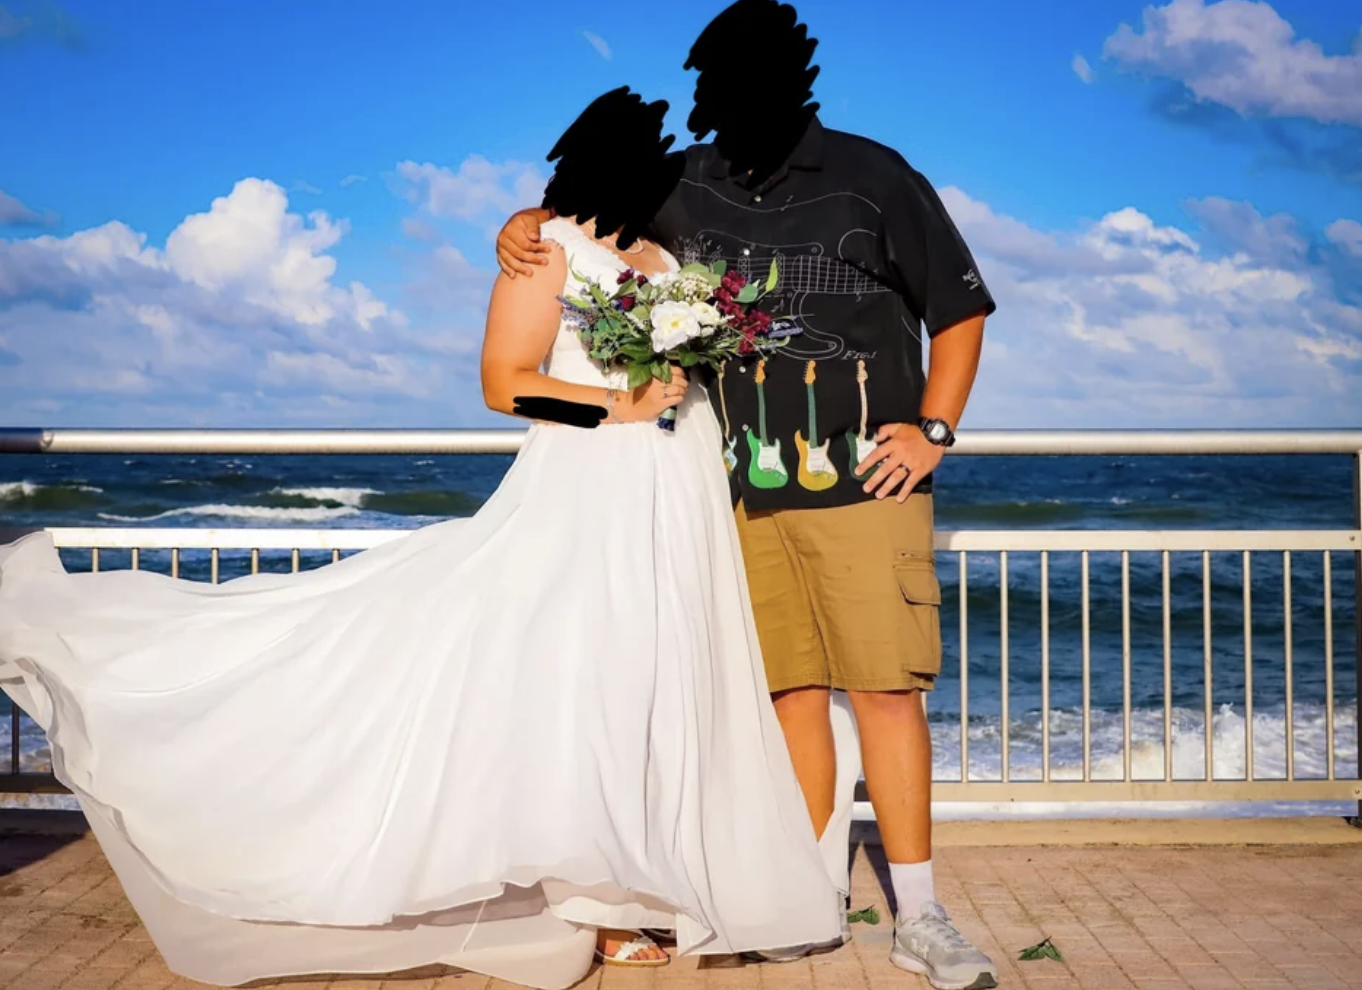 The bride is wearing a traditional wedding dress, while the groom is wearing cargo shorts, tennis shoes, and a graphic T-shirt covered in guitars